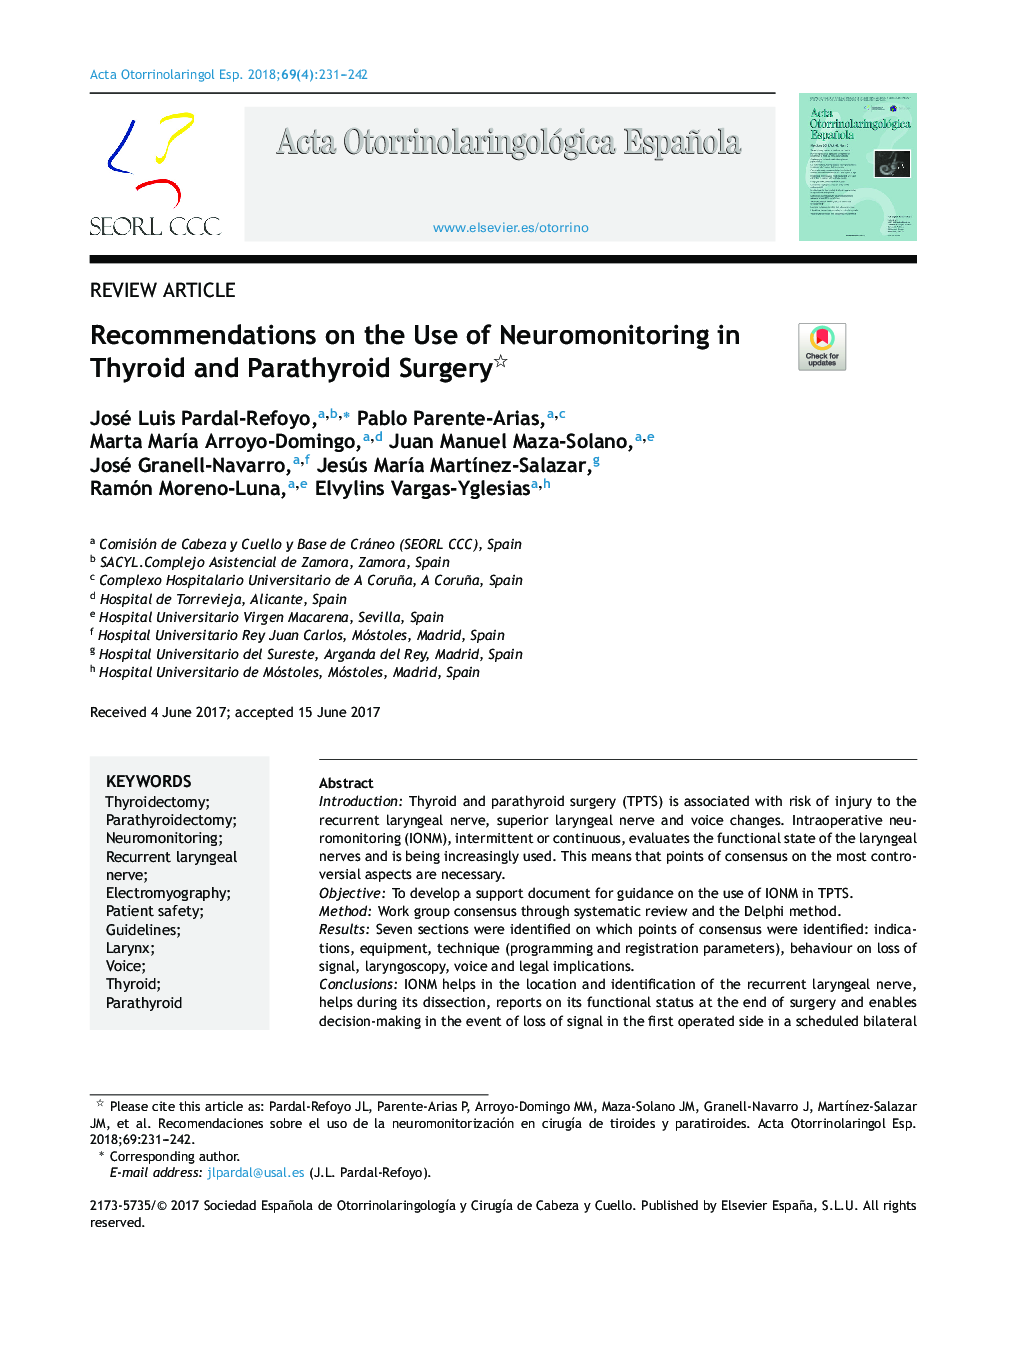 Recommendations on the Use of Neuromonitoring in Thyroid and Parathyroid Surgery